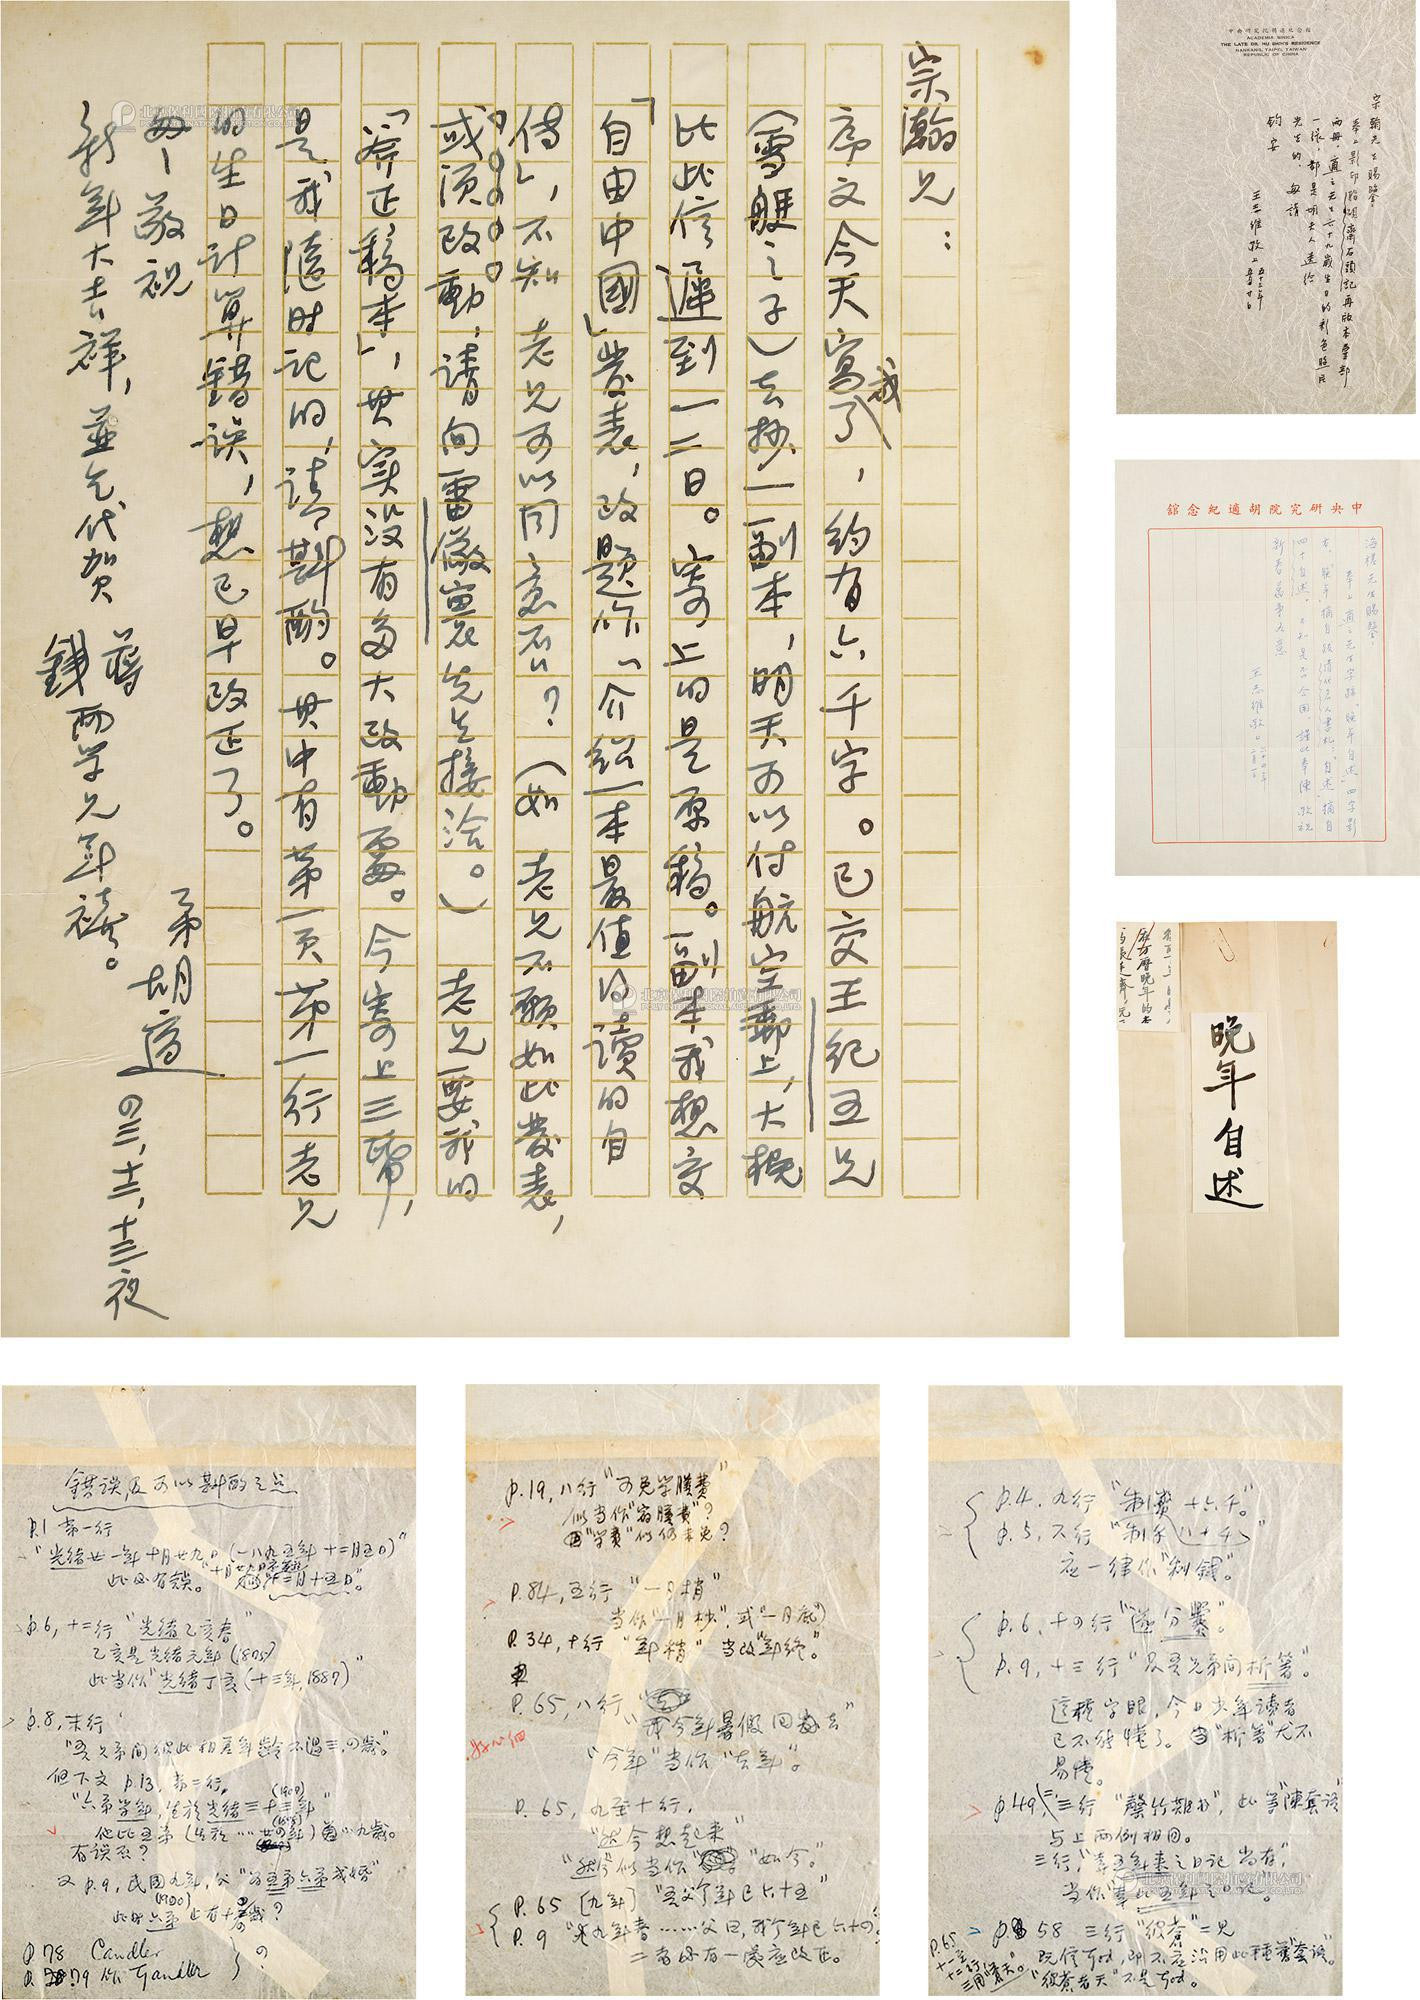 Letter of one page by Hu Shi to Shen Zonghan and three Pages submission by Hu Shi， with reference